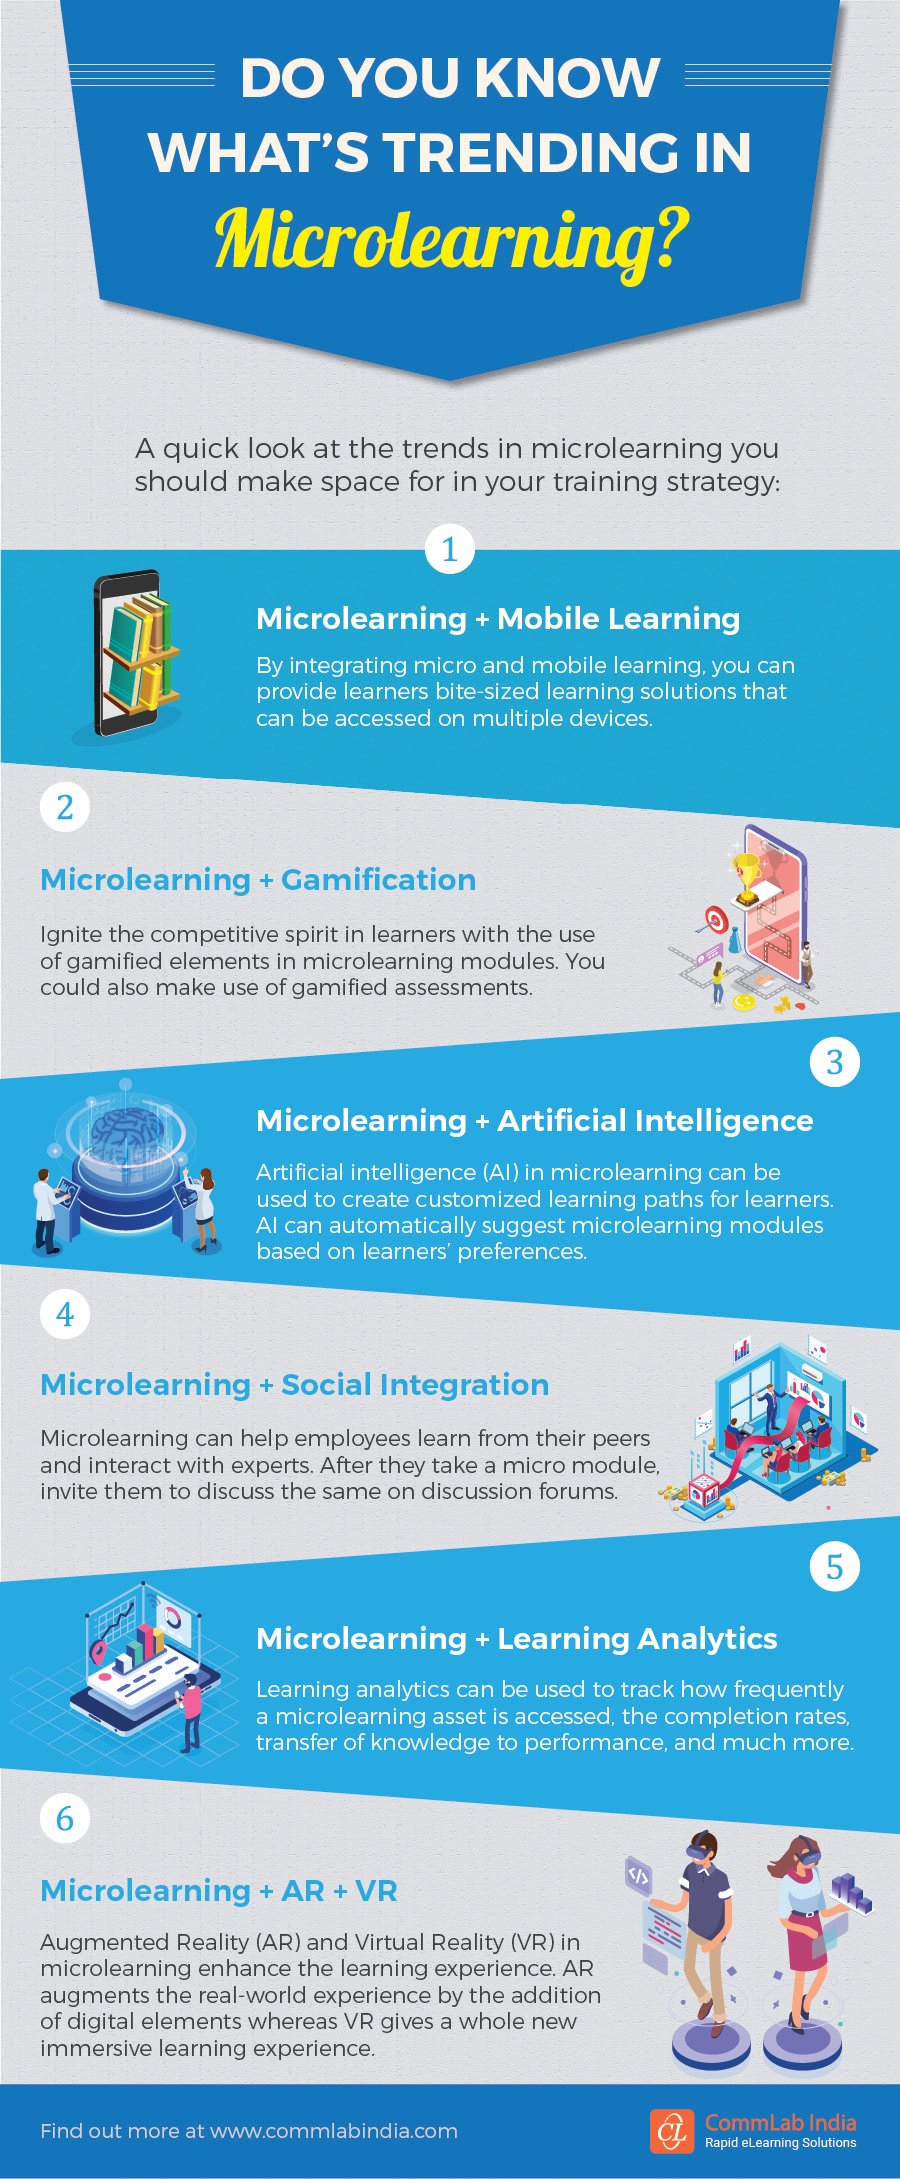 Do You Know What’s Trending in Microlearning? [Infographic]